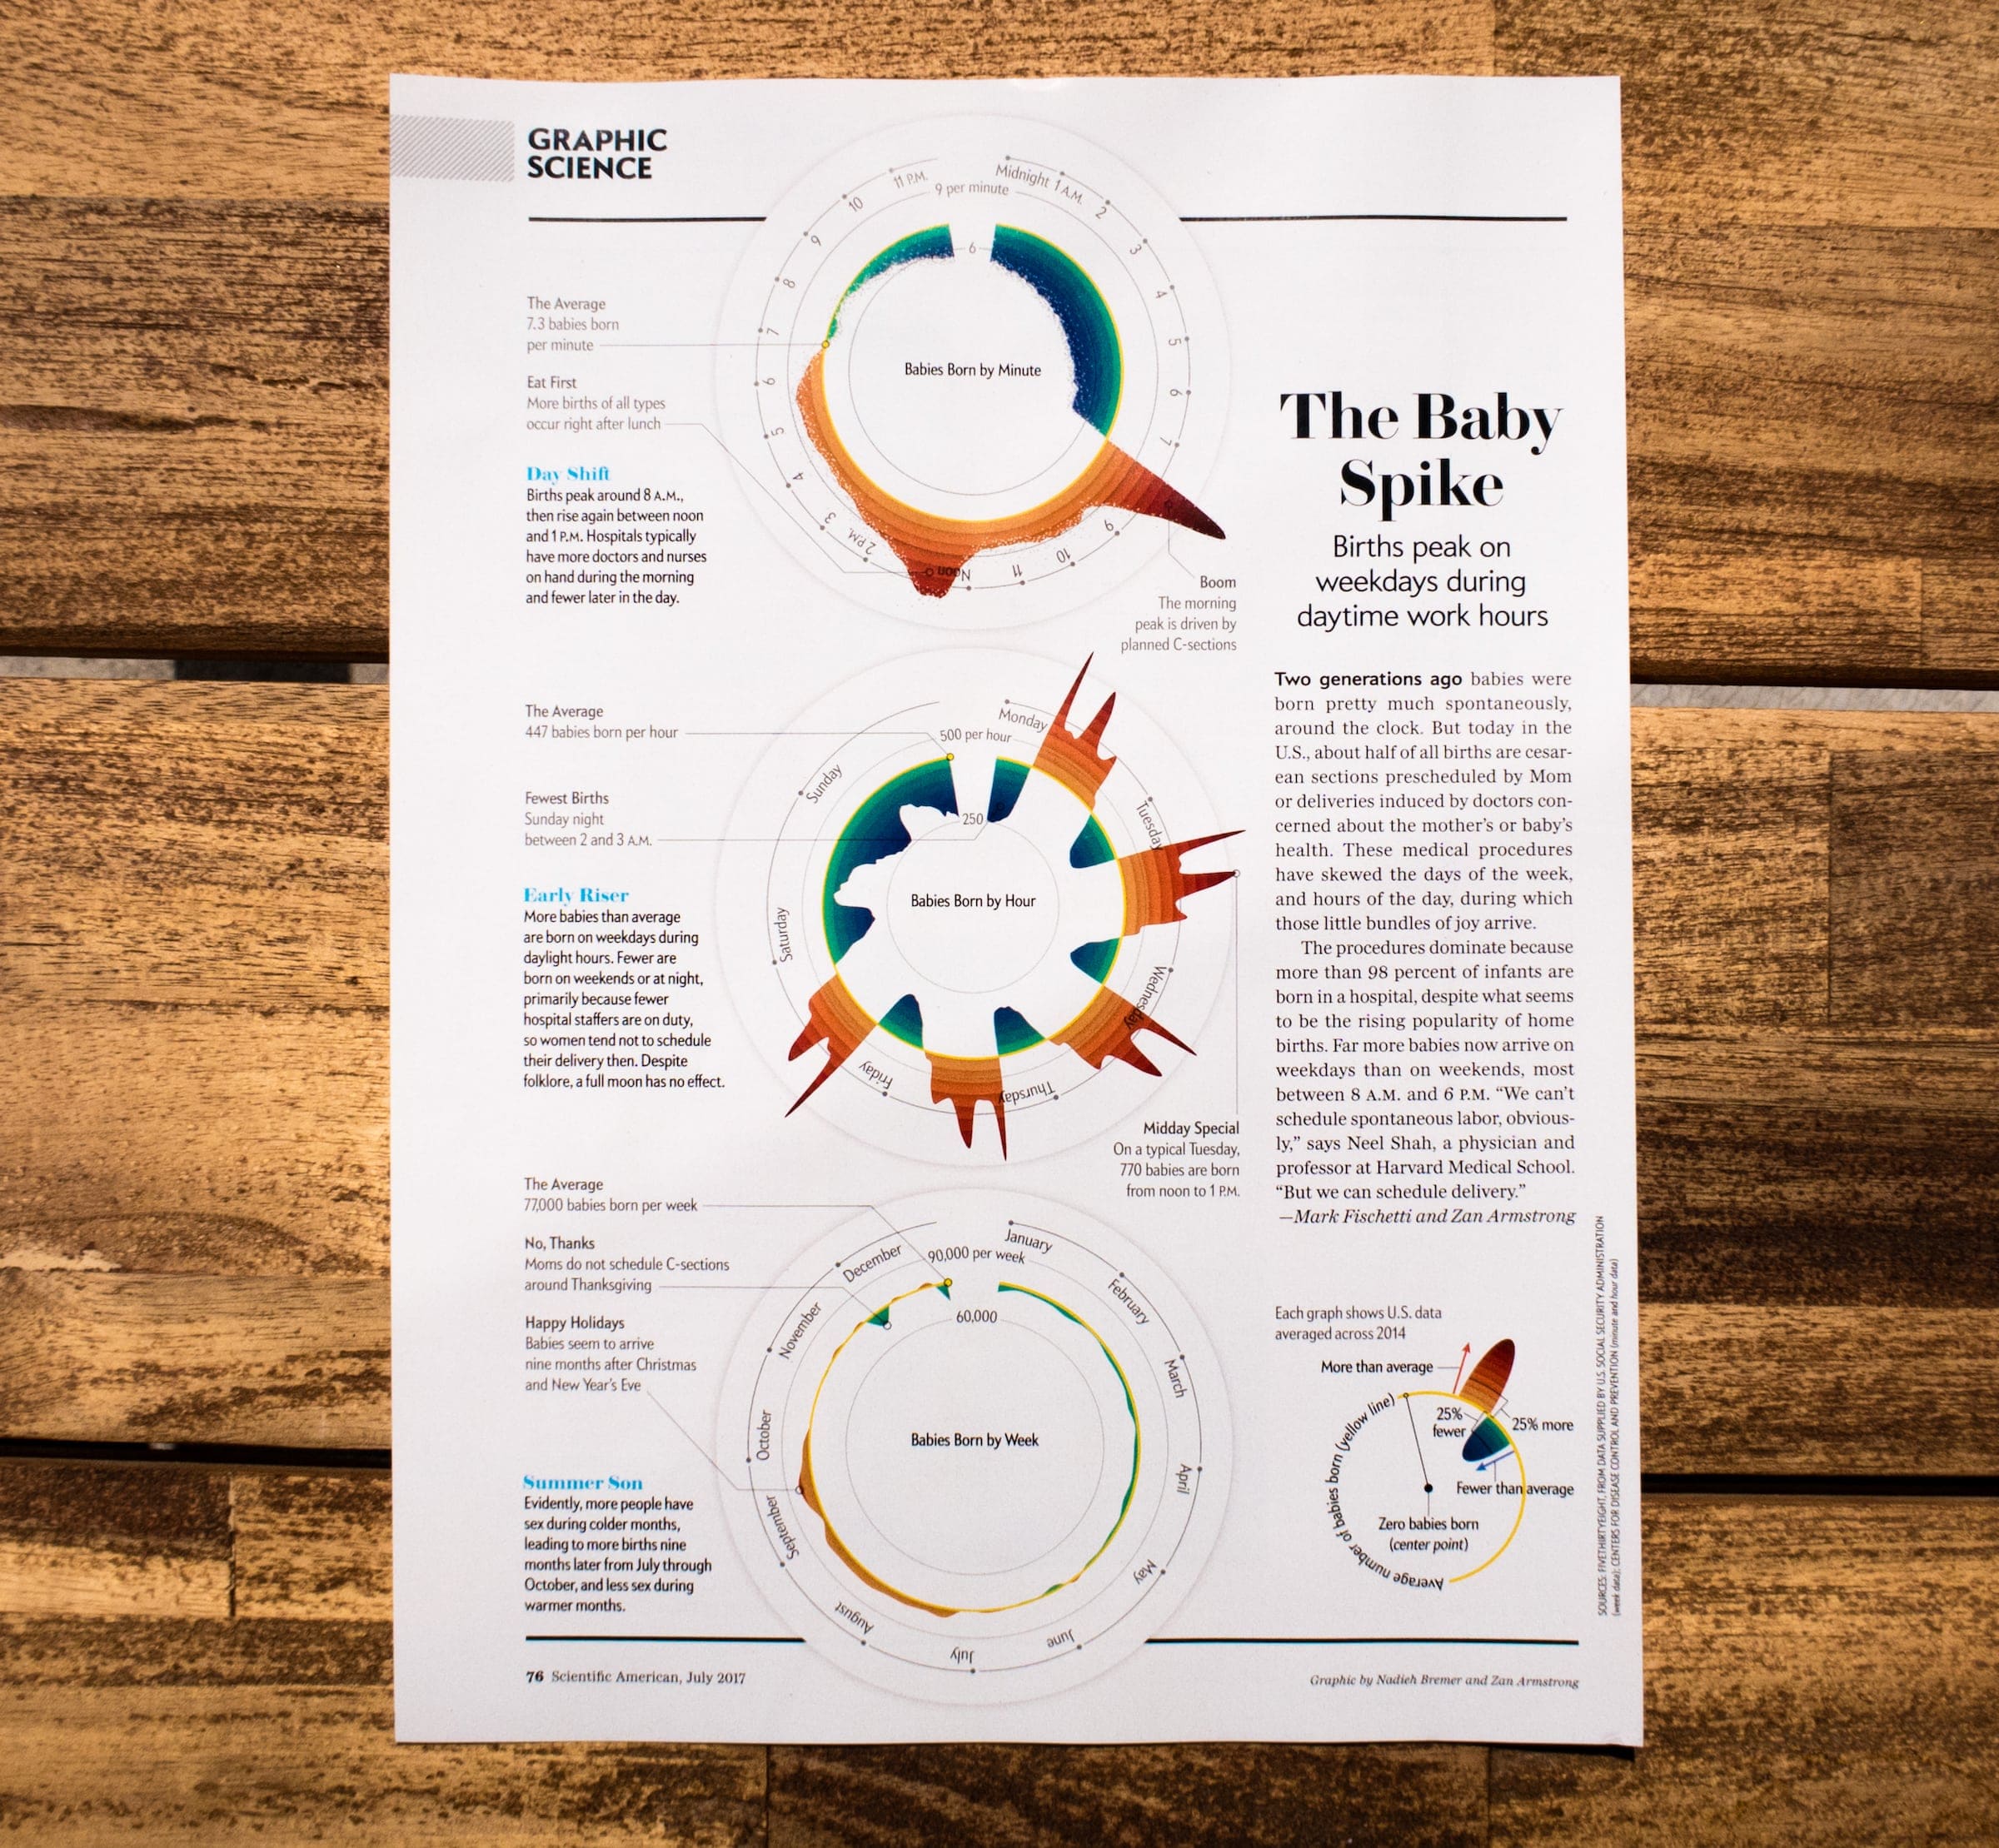 The full 'Graphic Science' page in the July edition of the Scientific American